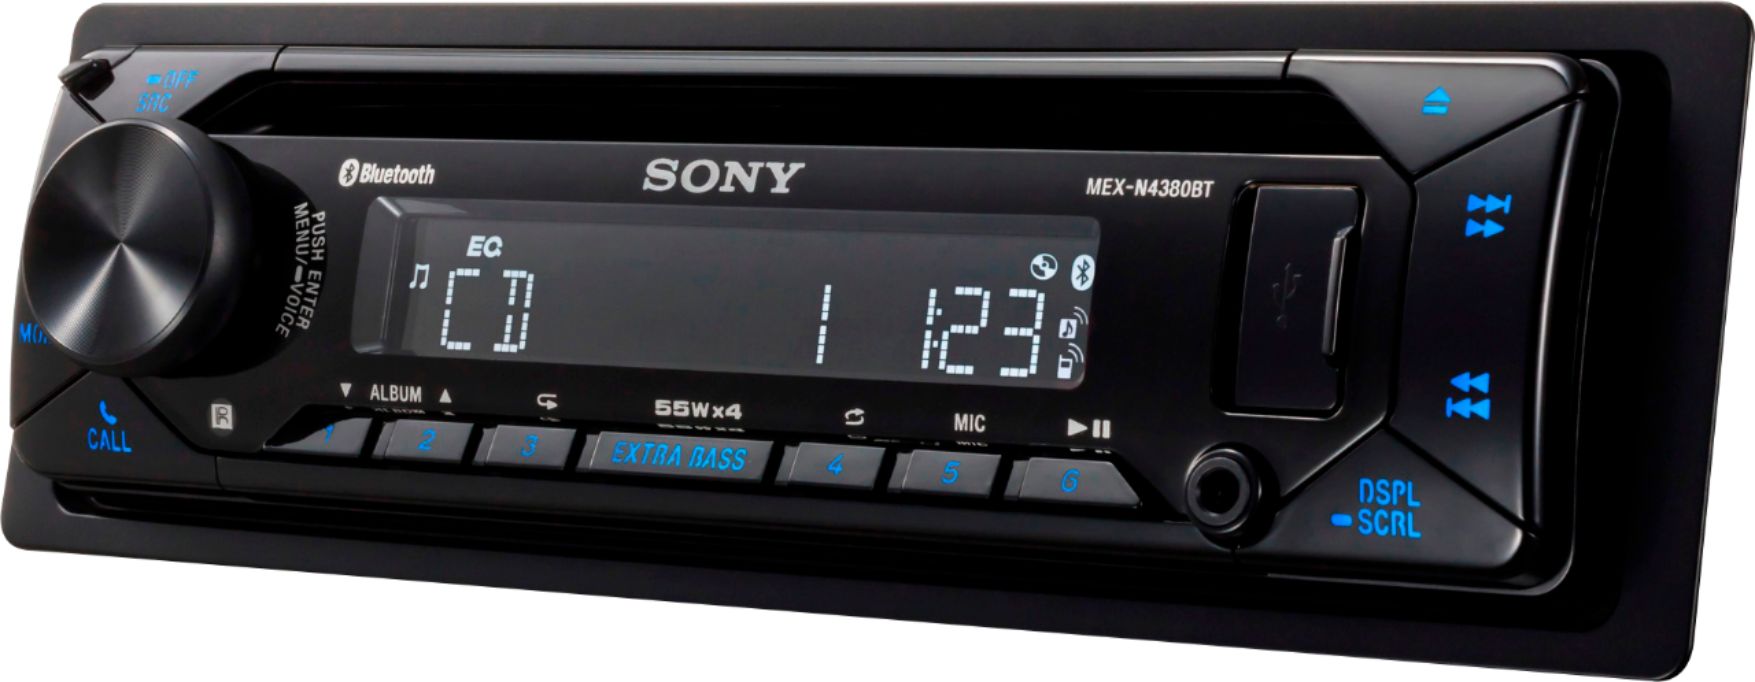 Left View: Sony - In-Dash Receiver - Built-in Bluetooth with Detachable Faceplate - Black